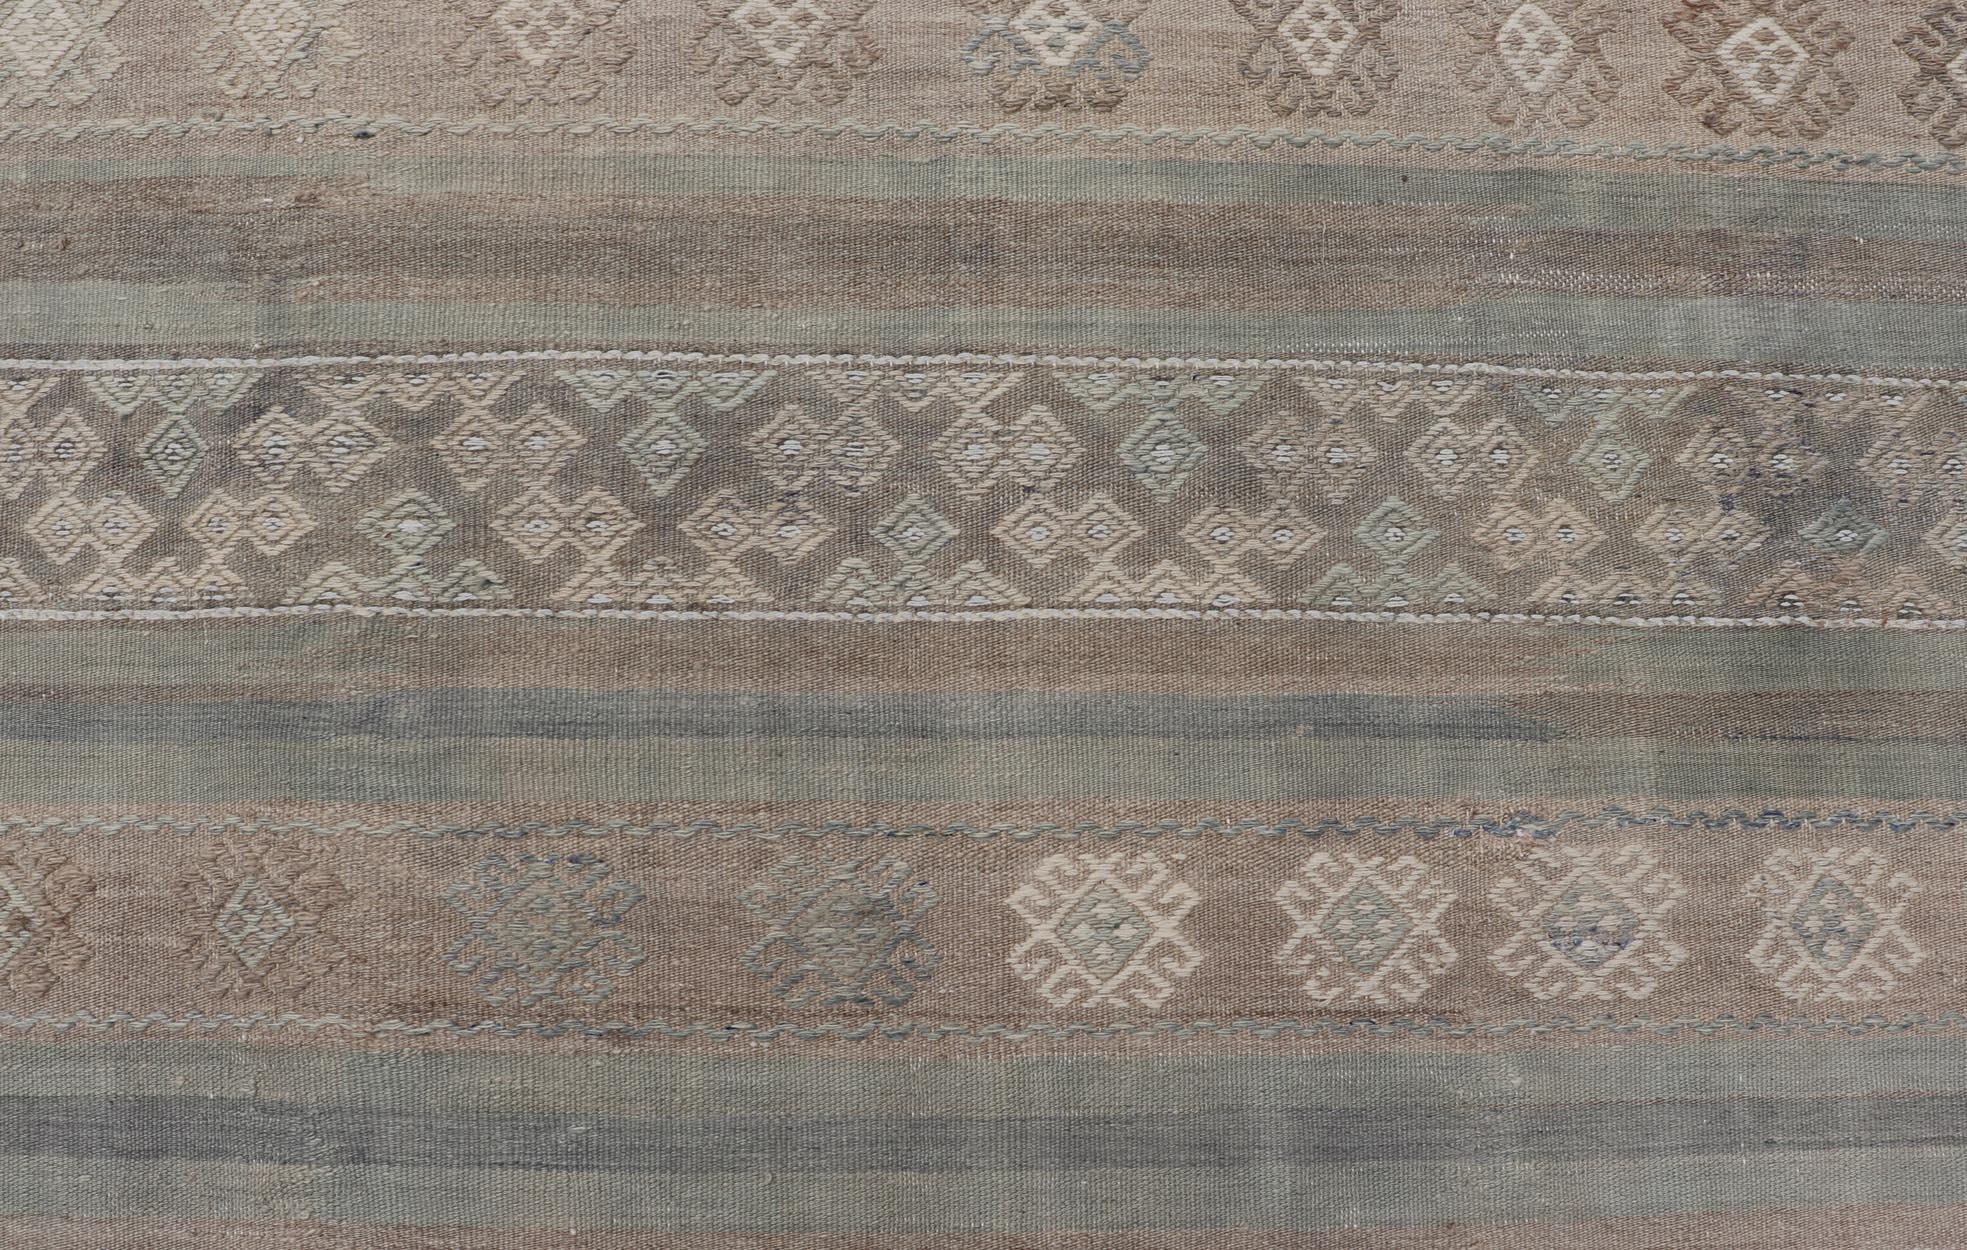 Vintage Turkish Kilim with Stripes in Taupe, Green, Tan, Cream and Brown For Sale 5